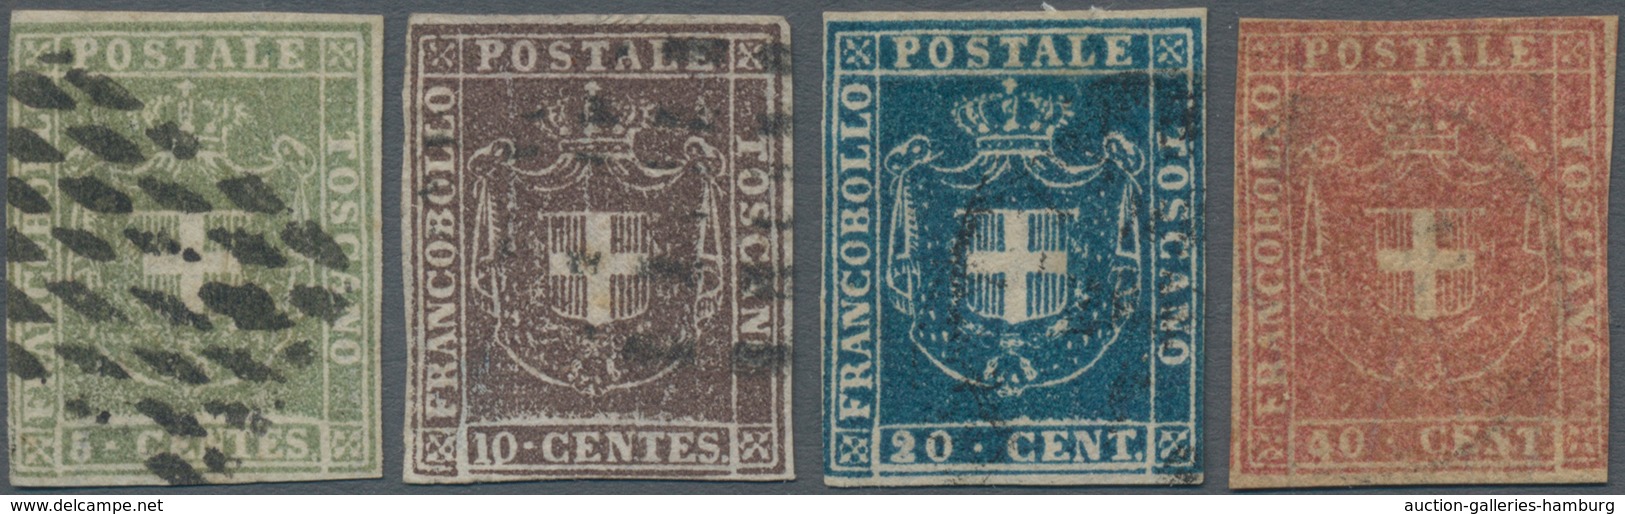 Italien - Altitalienische Staaten: Toscana: 1860, Four Stamps Set 5 C. Olive Green To 40 C. Dull Car - Tuscany